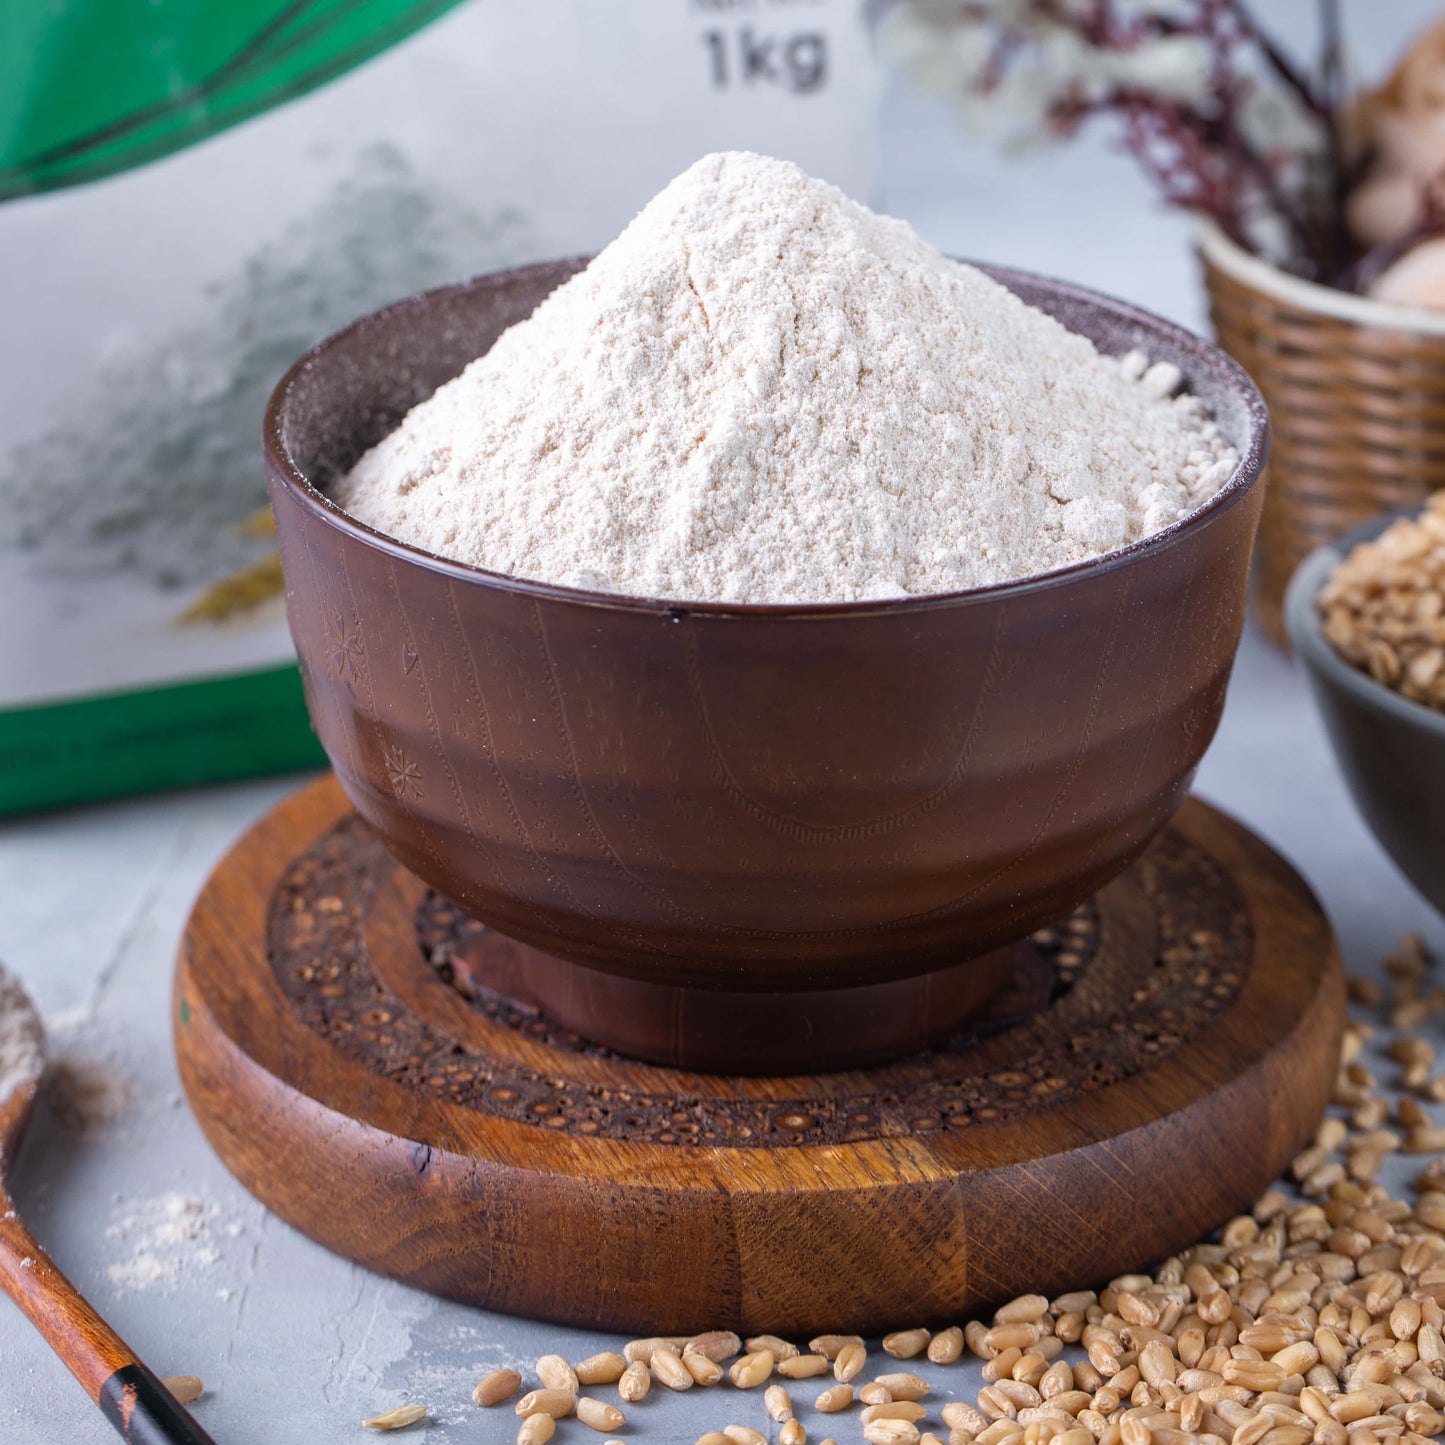 Fortified Whole Wheat Flour